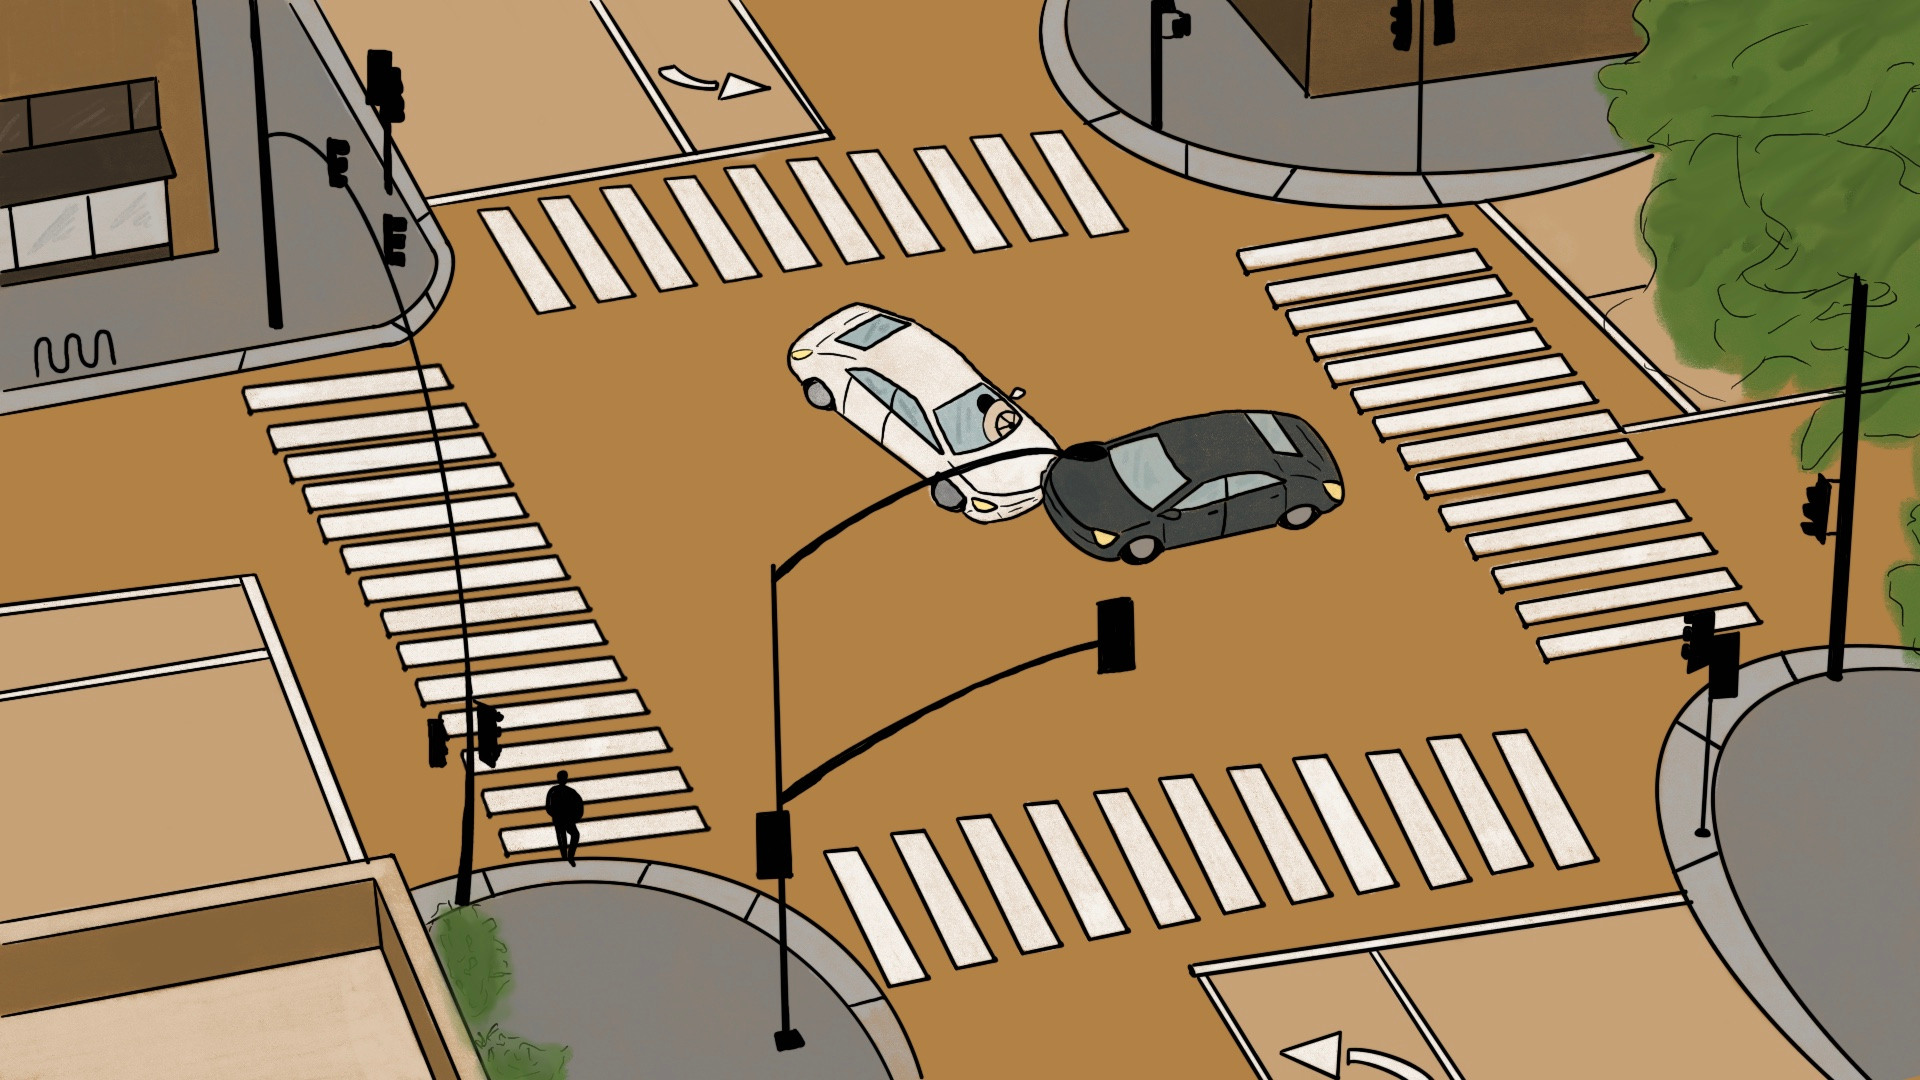 Illustration of two cars colliding in a box junction